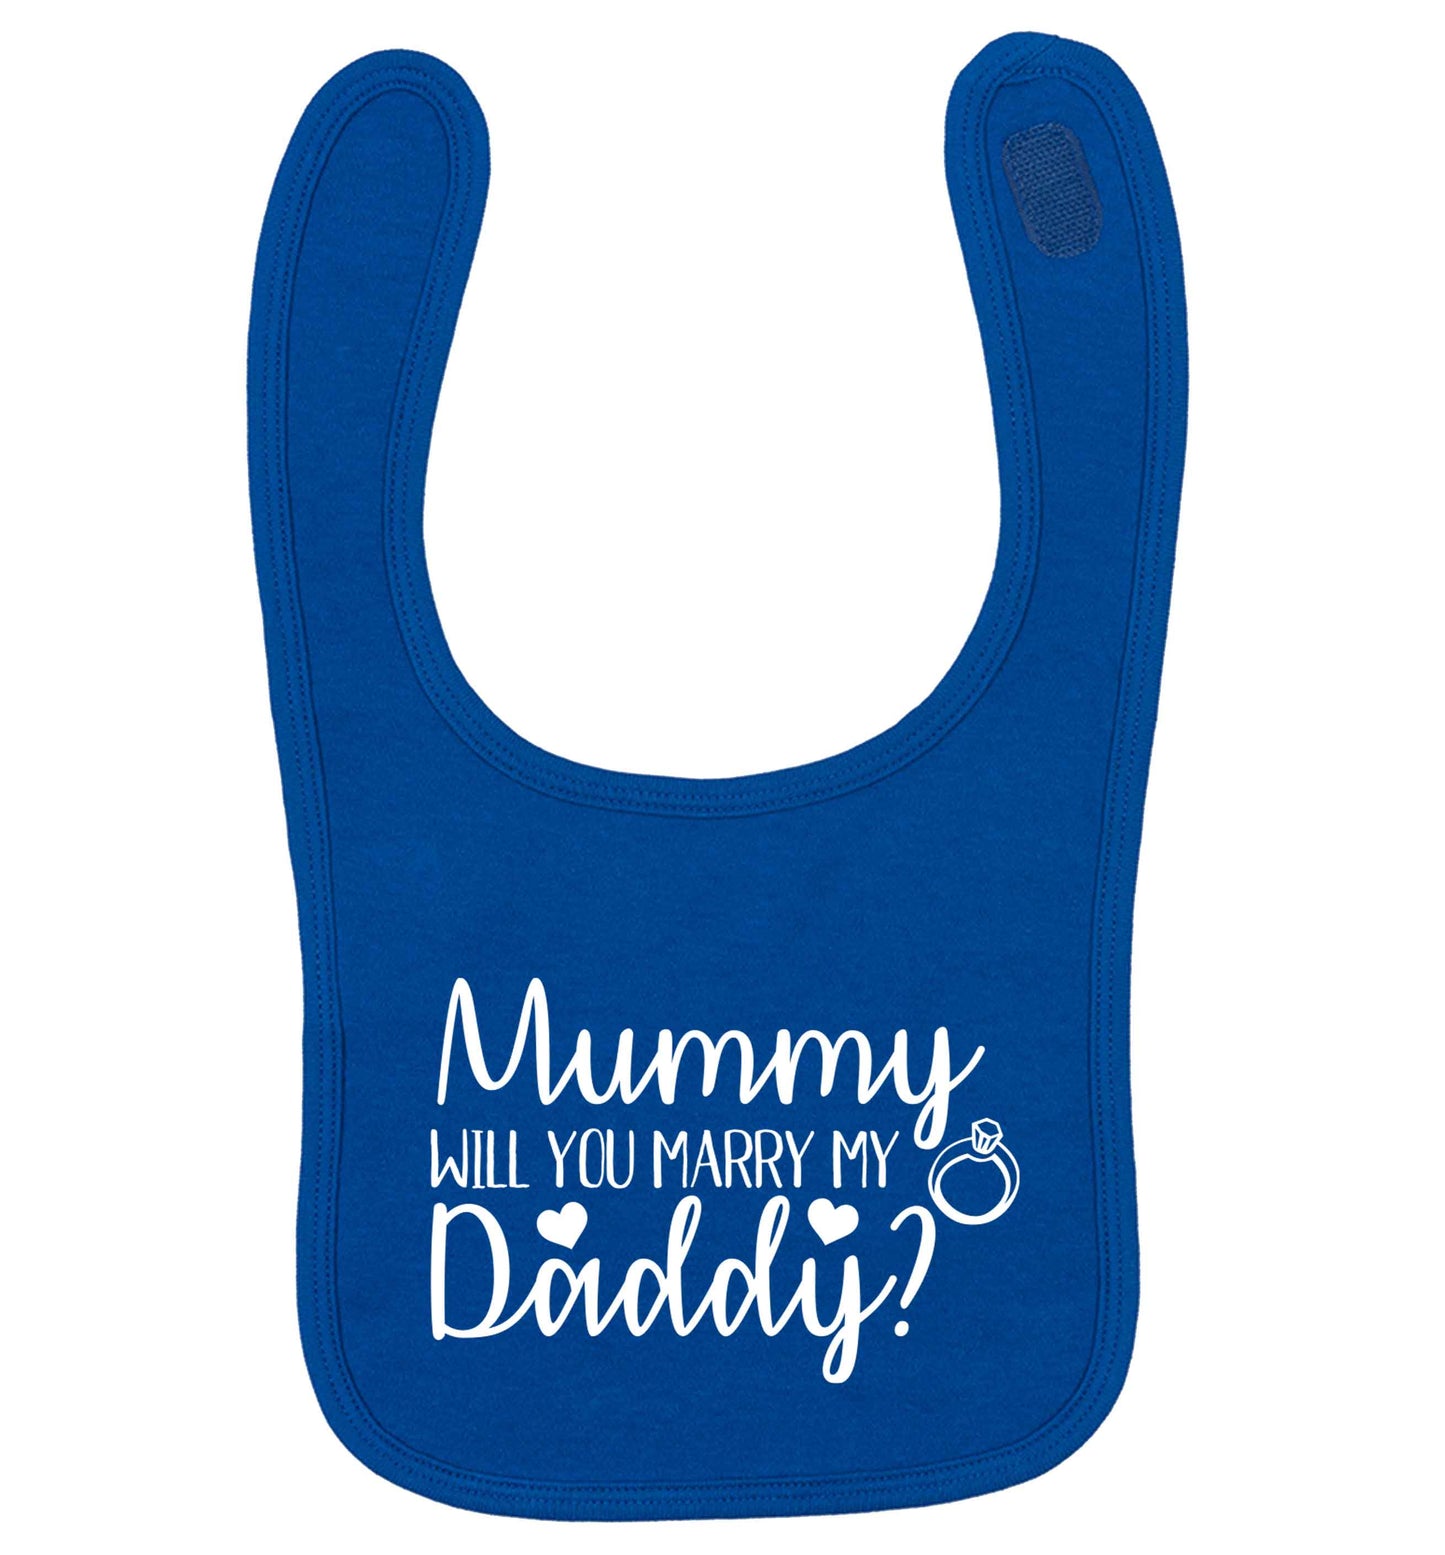 Looking for a unique way to pop the question? Why not let your kids do it!  royal blue baby bib